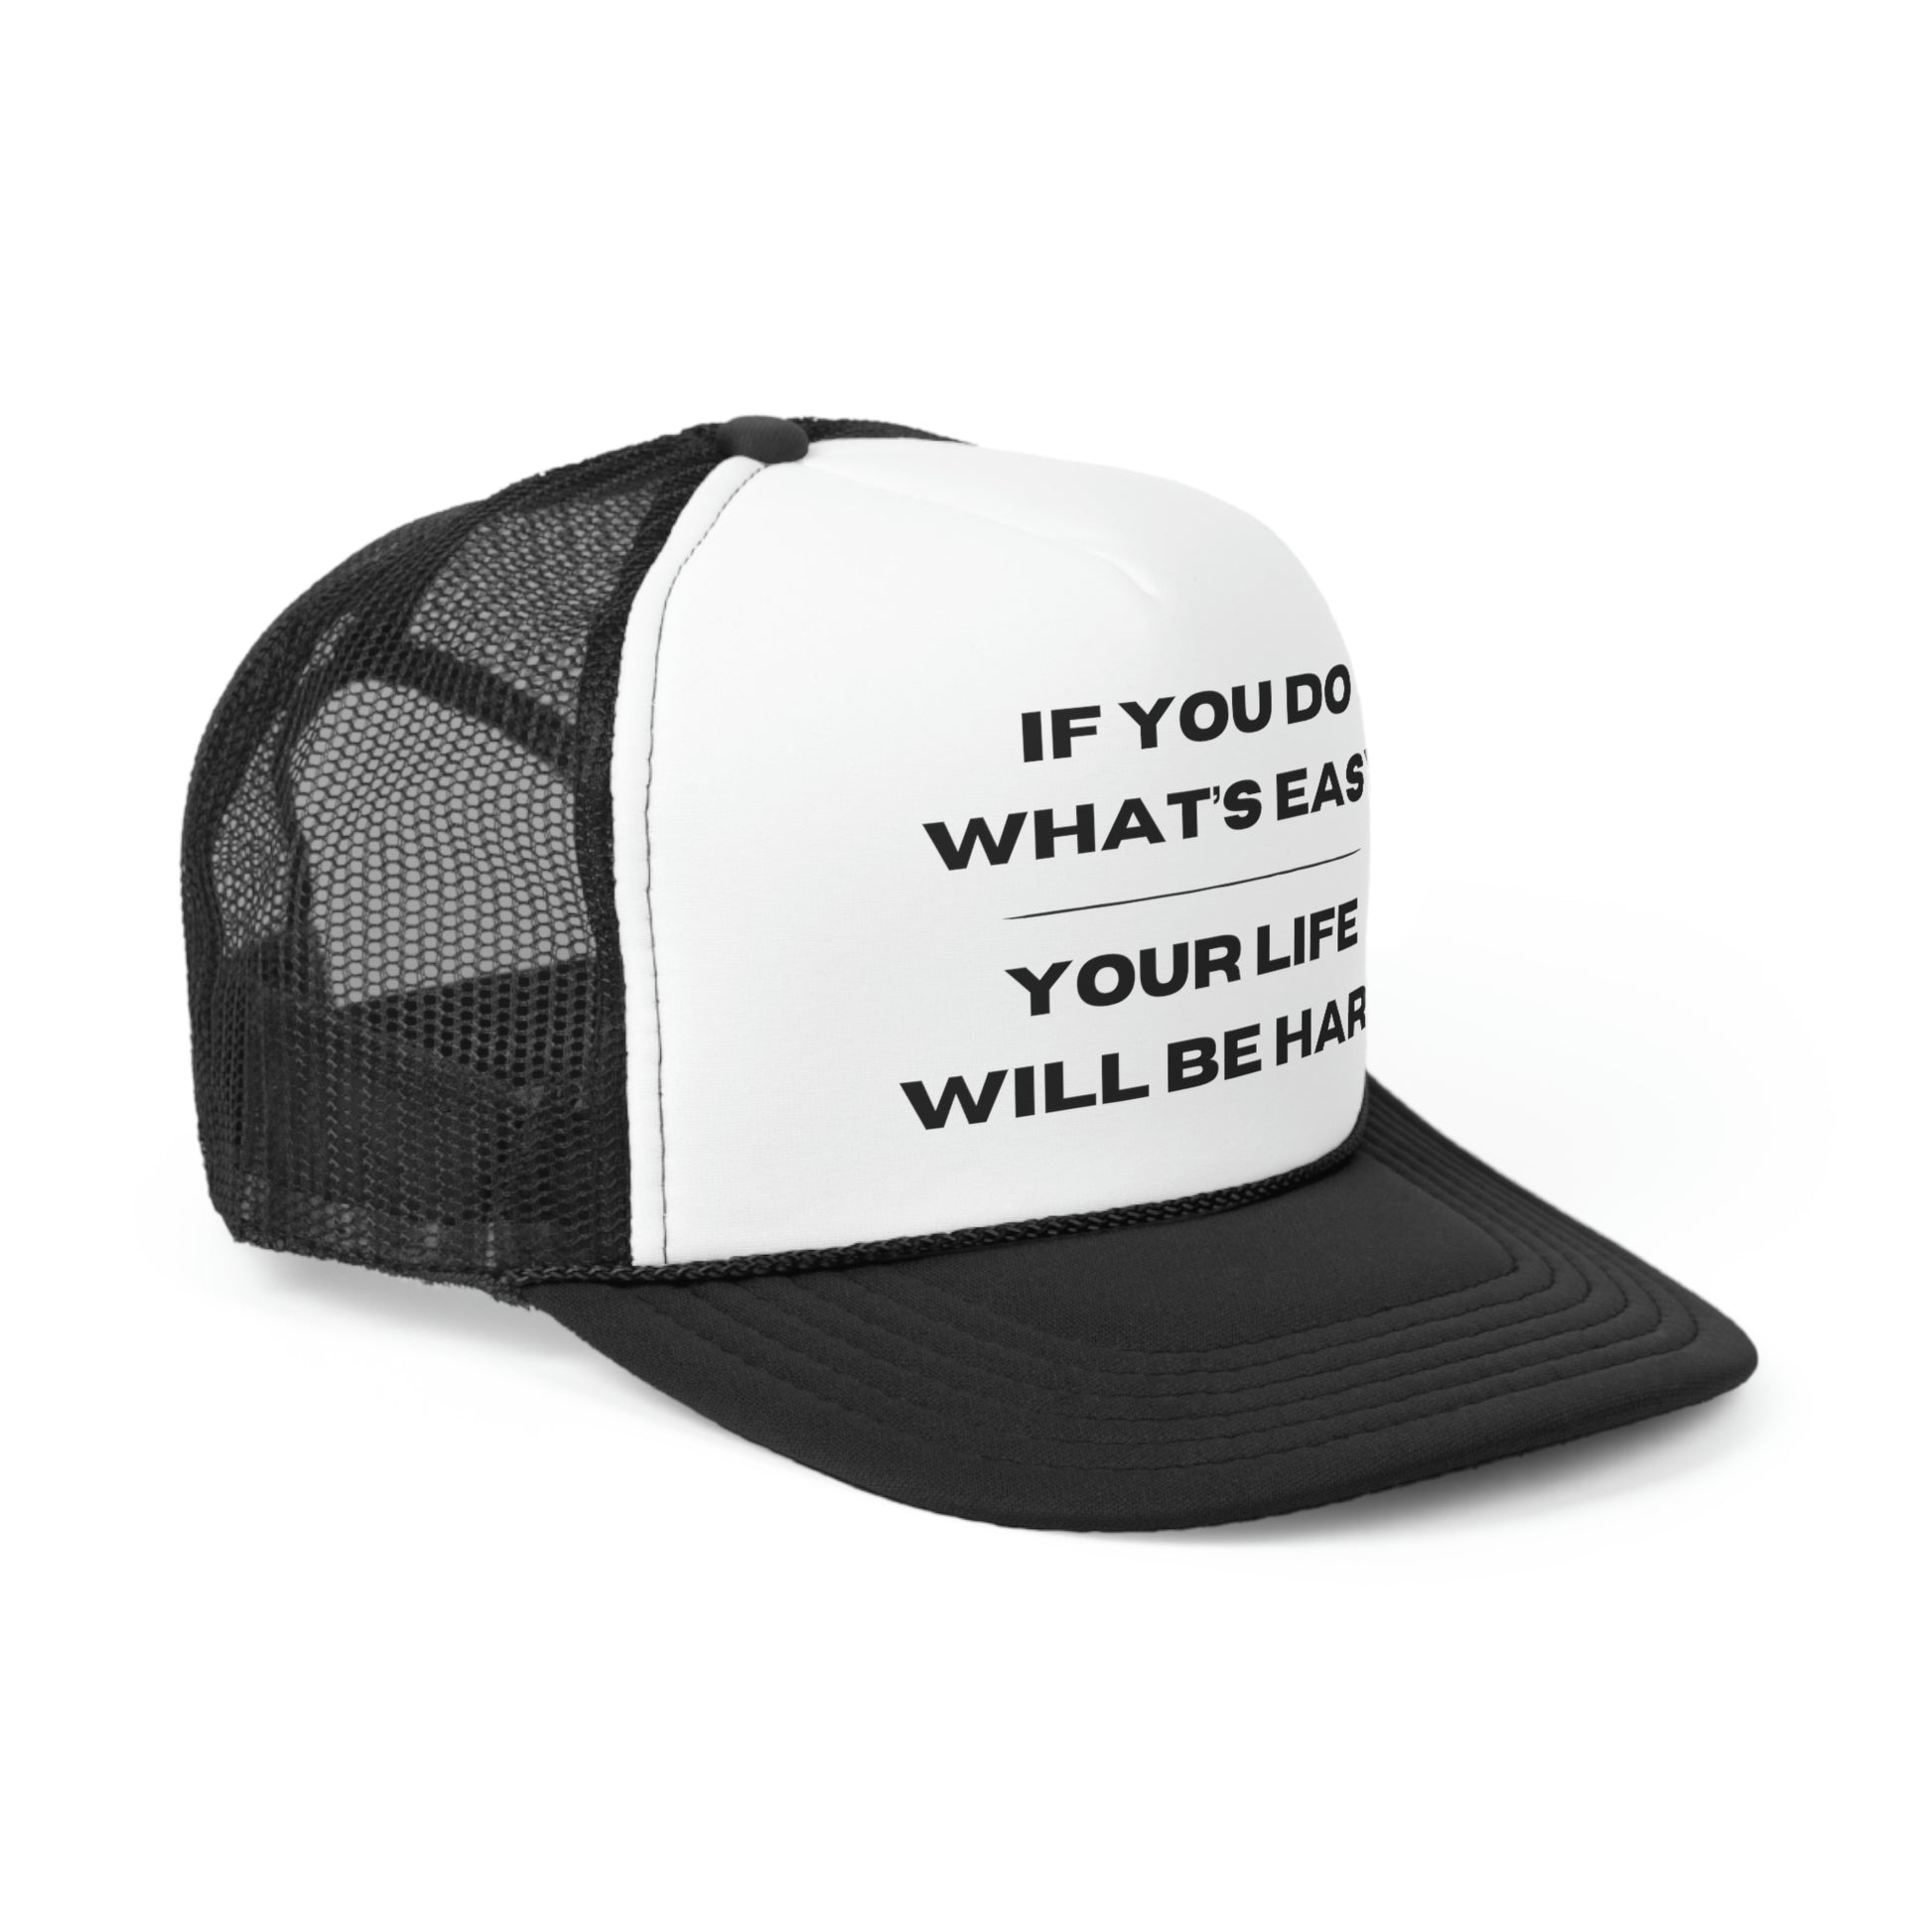 "If You Do What's Easy, Your Life Will Be Hard" Hat - Weave Got Gifts - Unique Gifts You Won’t Find Anywhere Else!